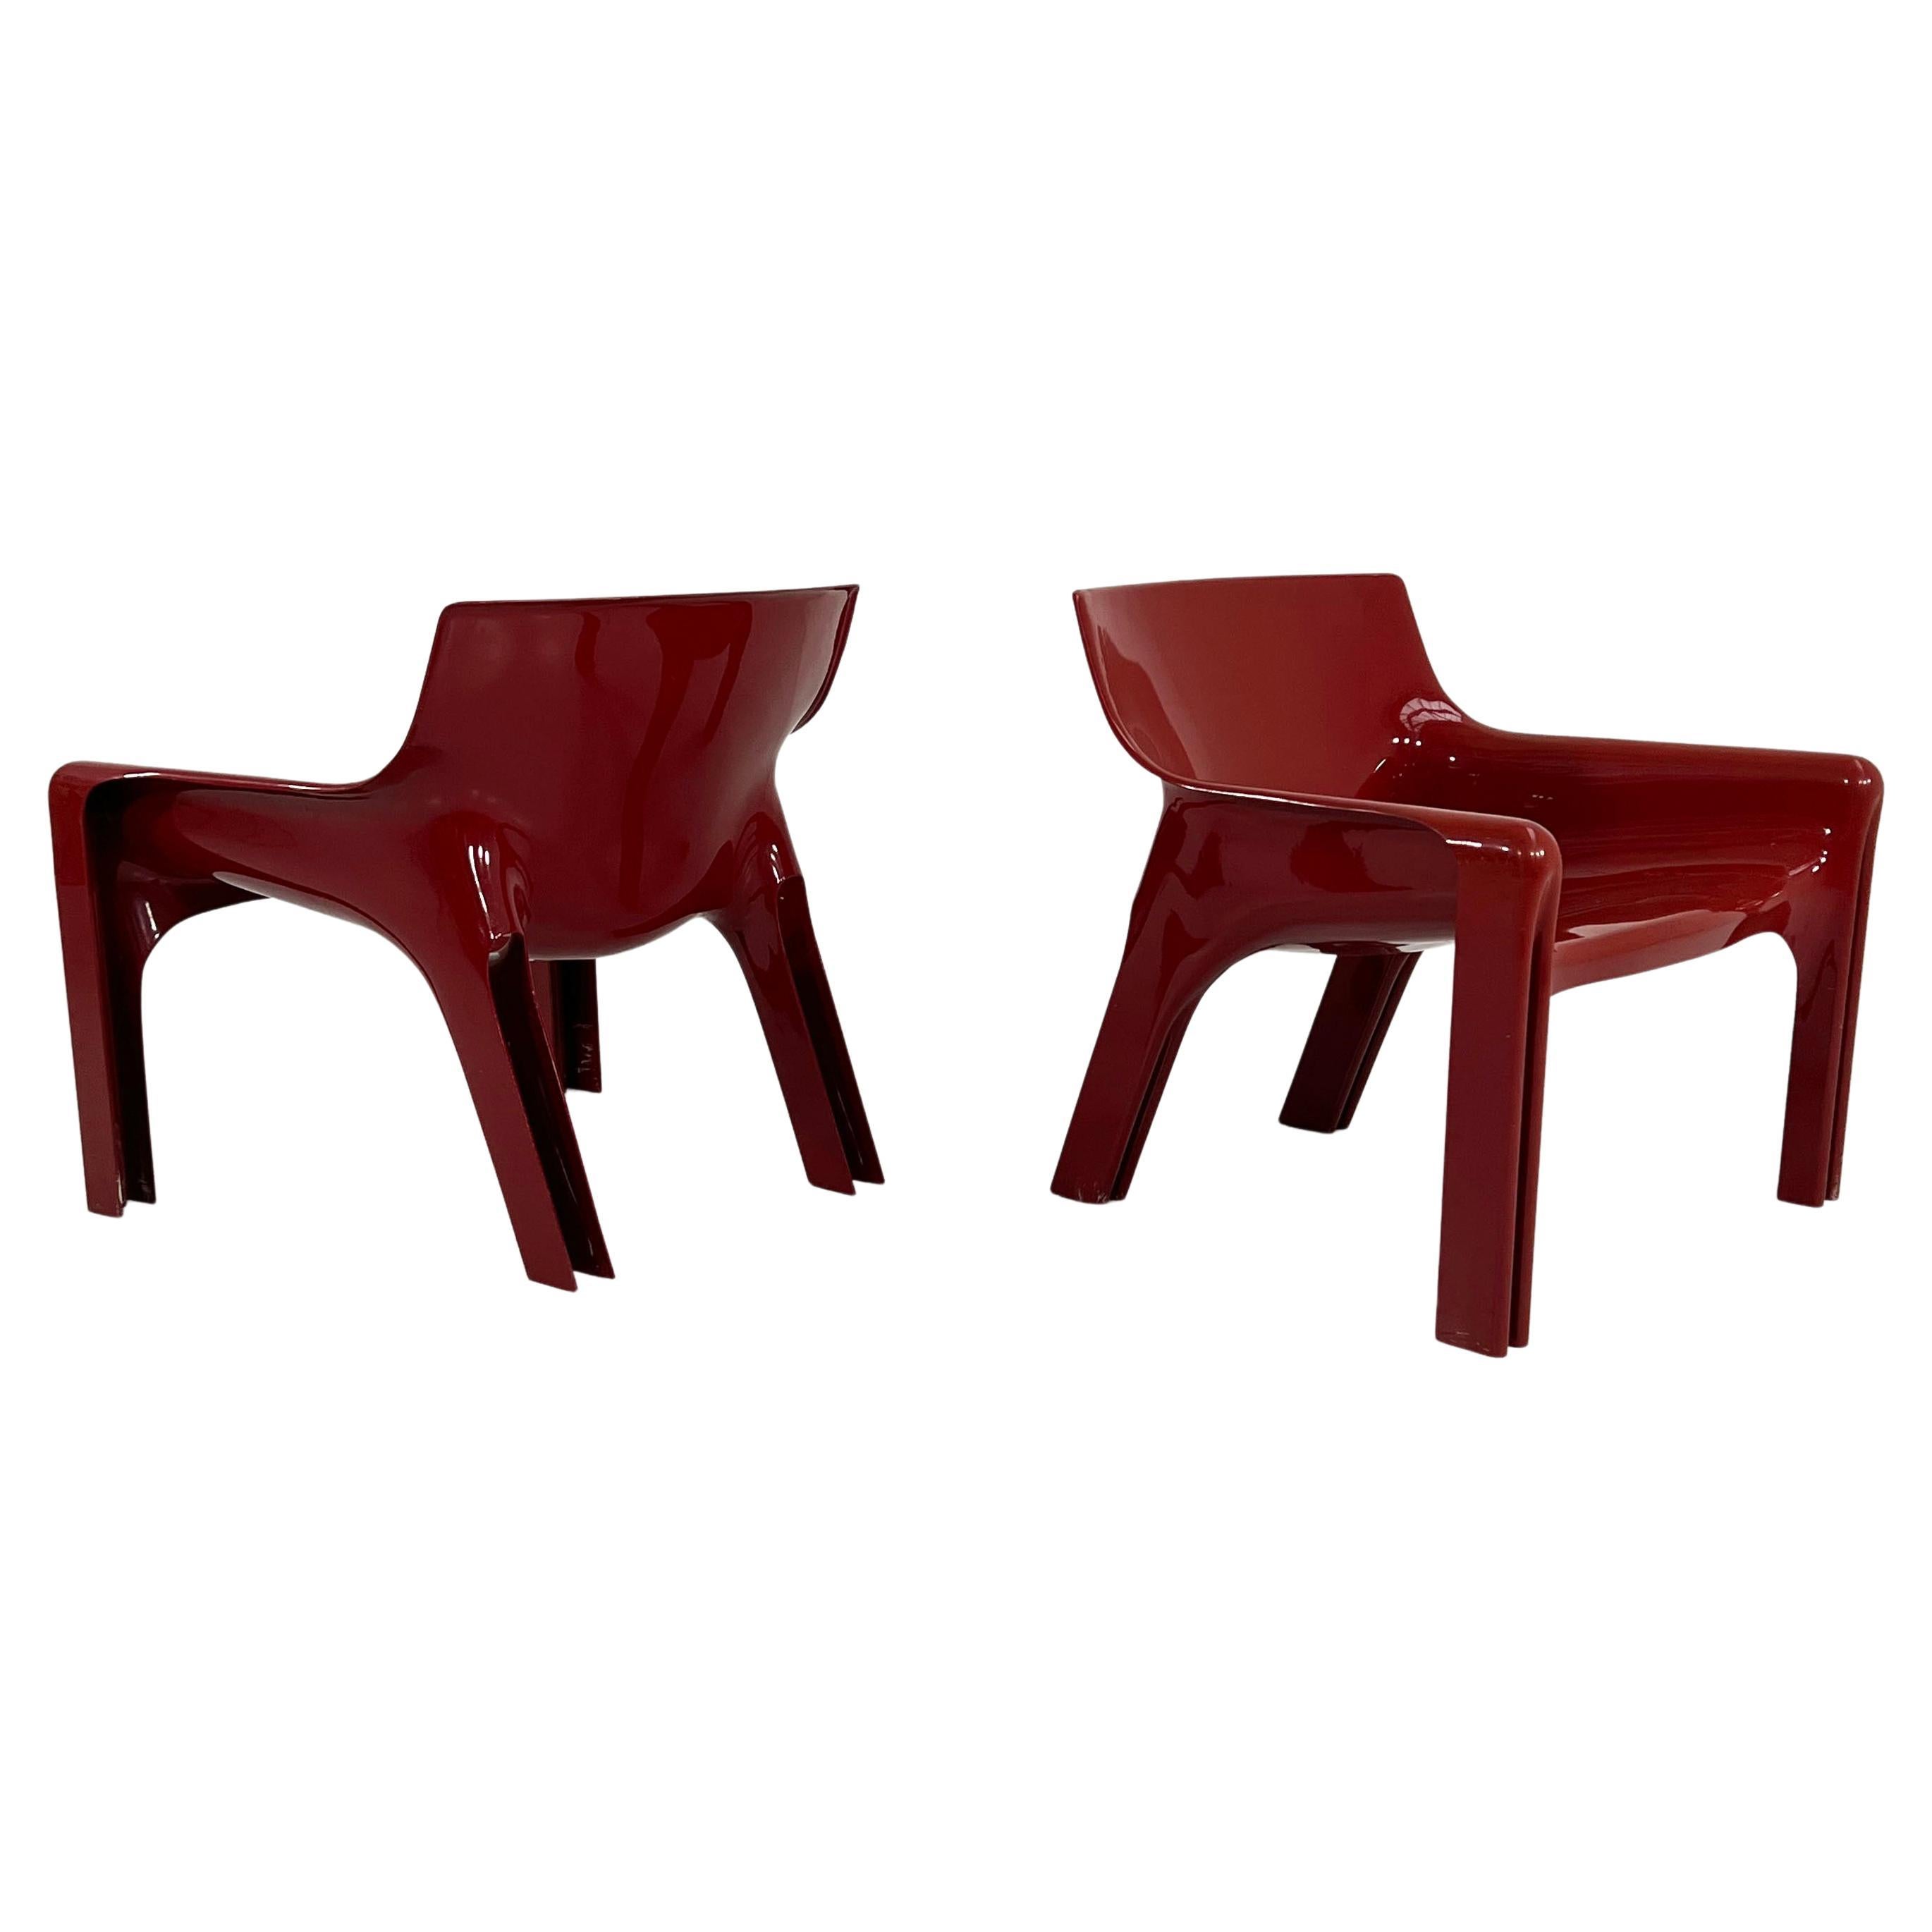 Pair of Burgundy Vicario Lounge Chair by Vico Magistretti for Artemide, 1970s